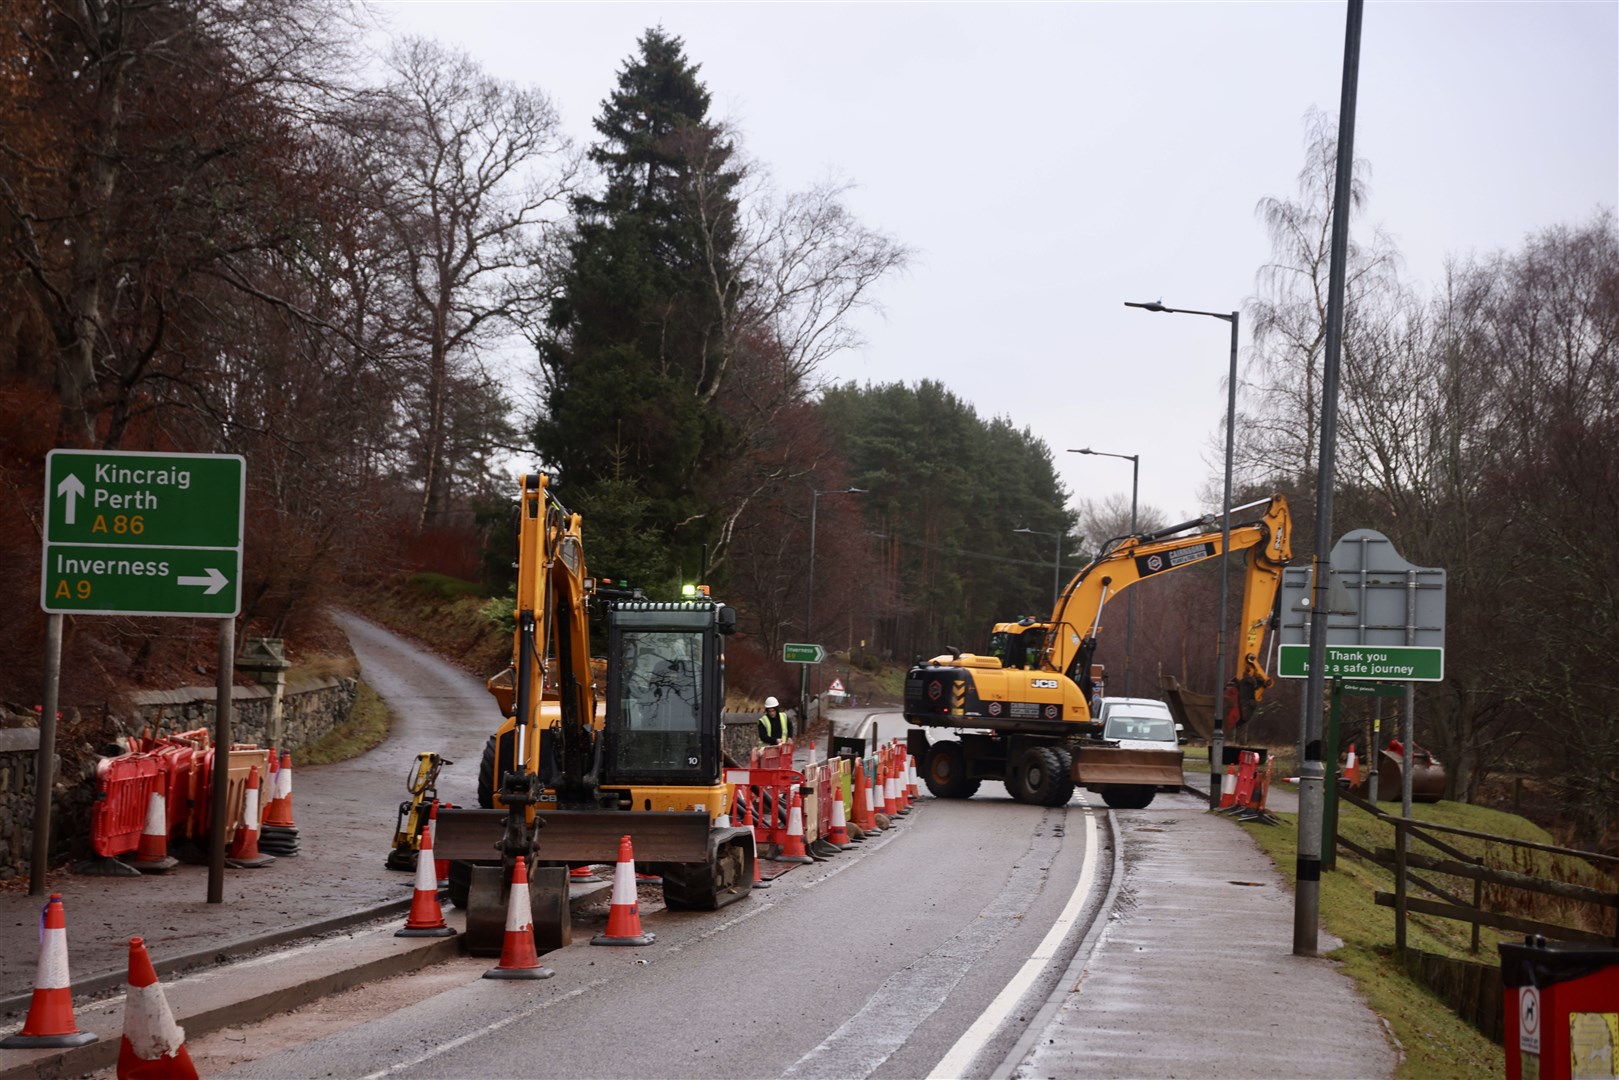 Disruption has arisen from roadworks at the northern end of the town.